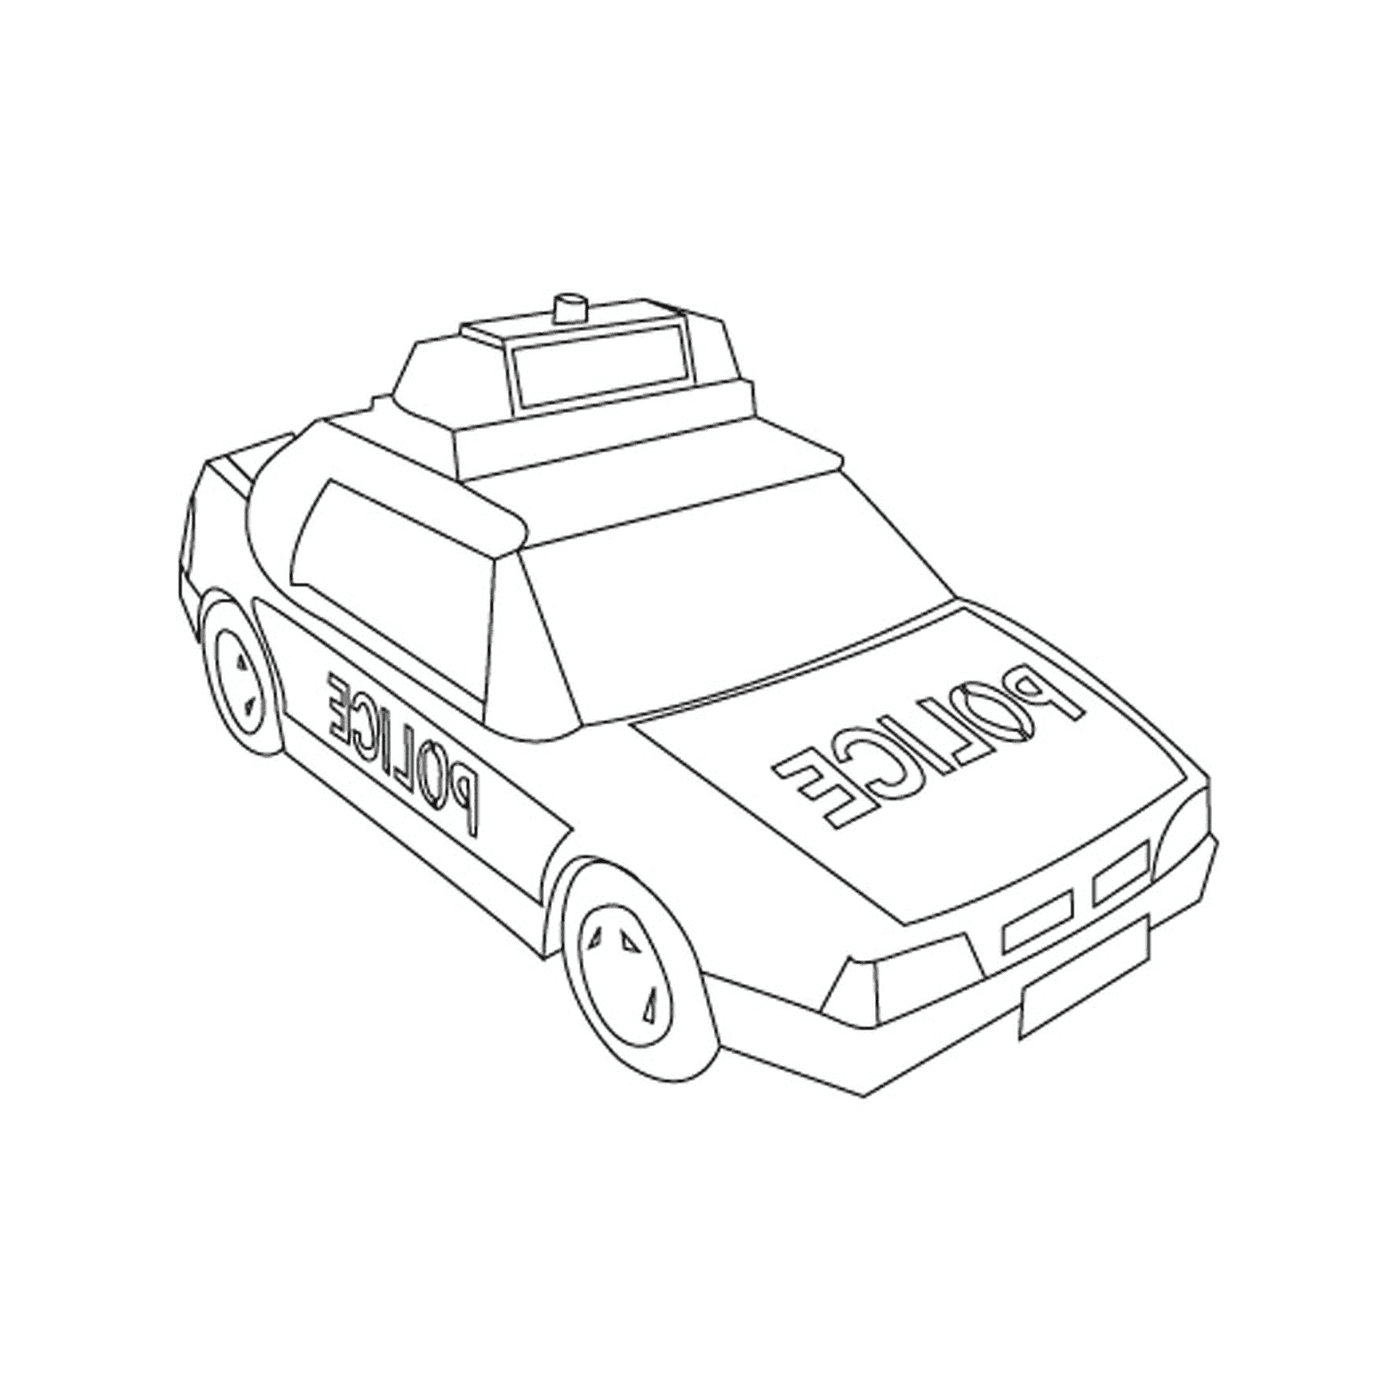  Contour of a police car on a white background 